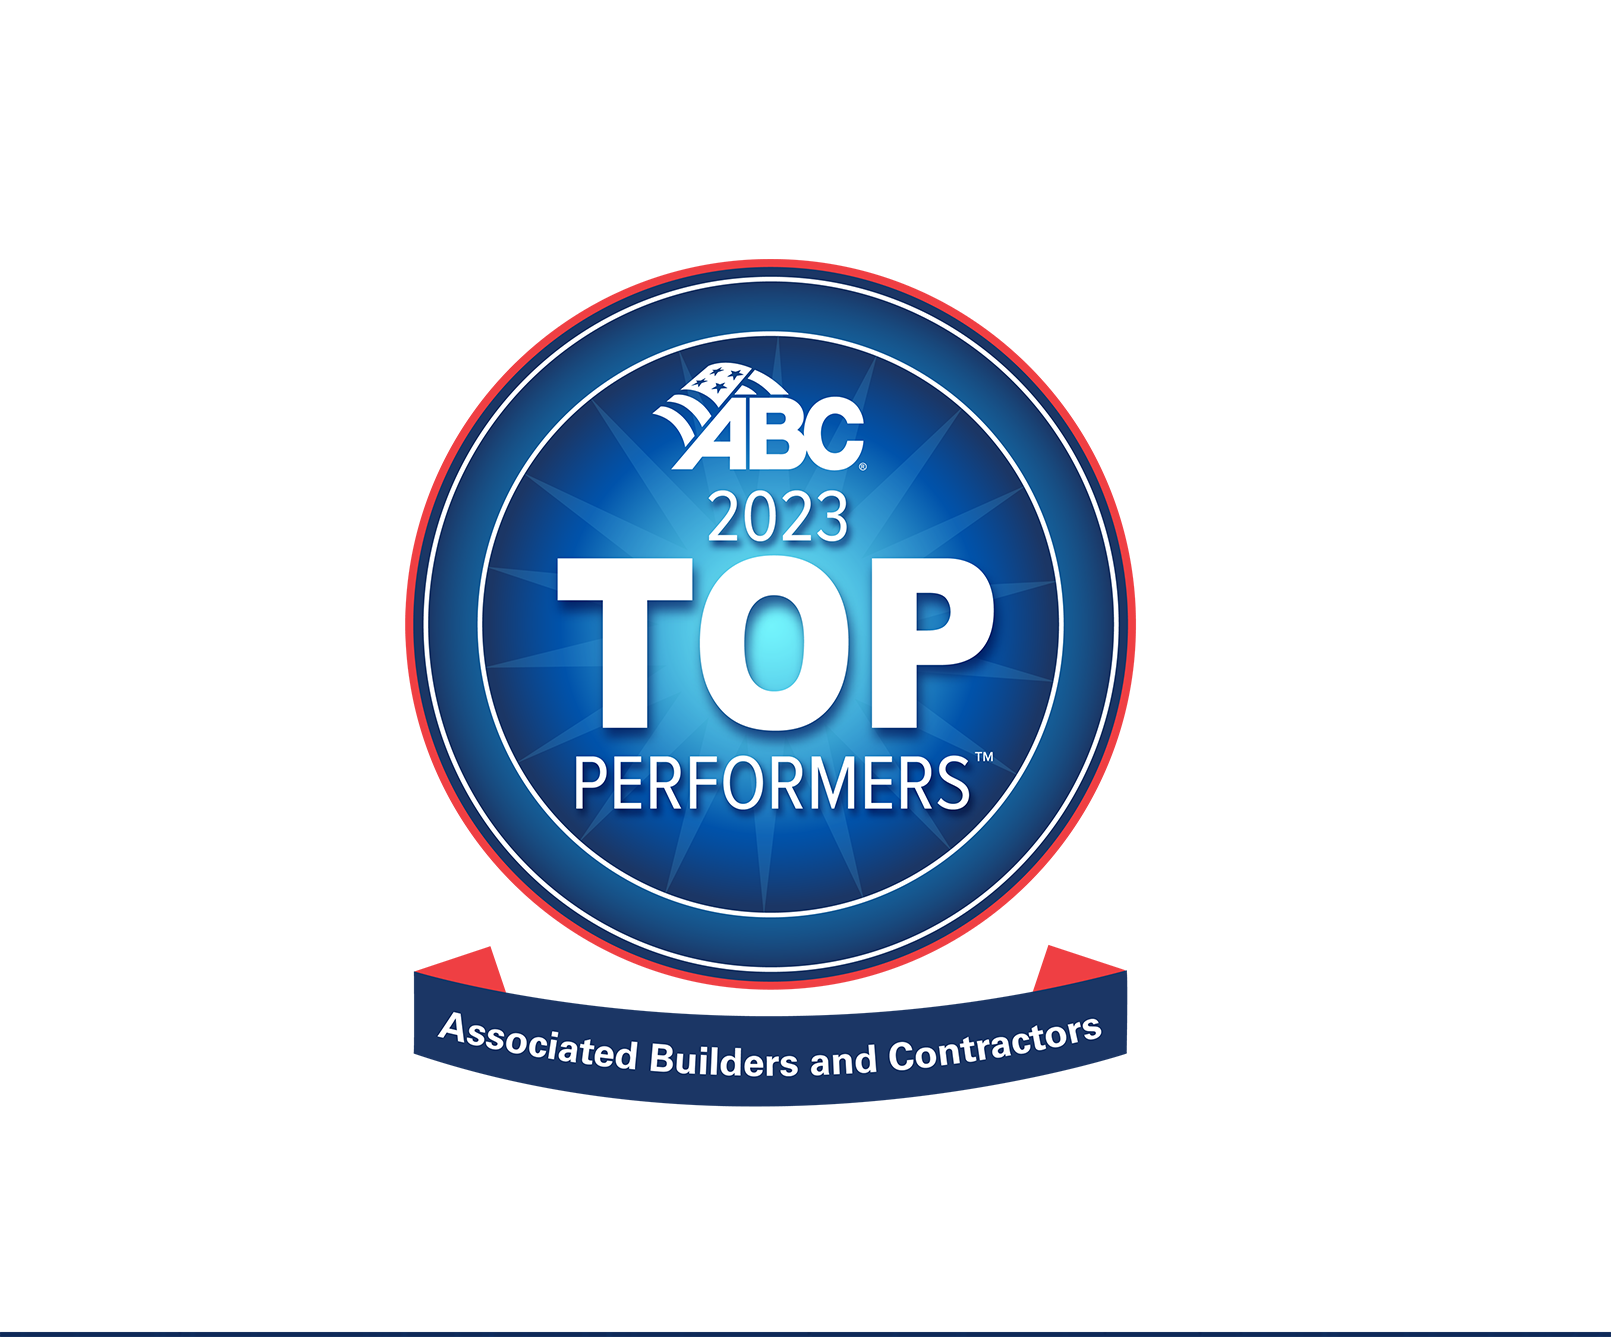 ABC Names HB a Top Performing Contractor